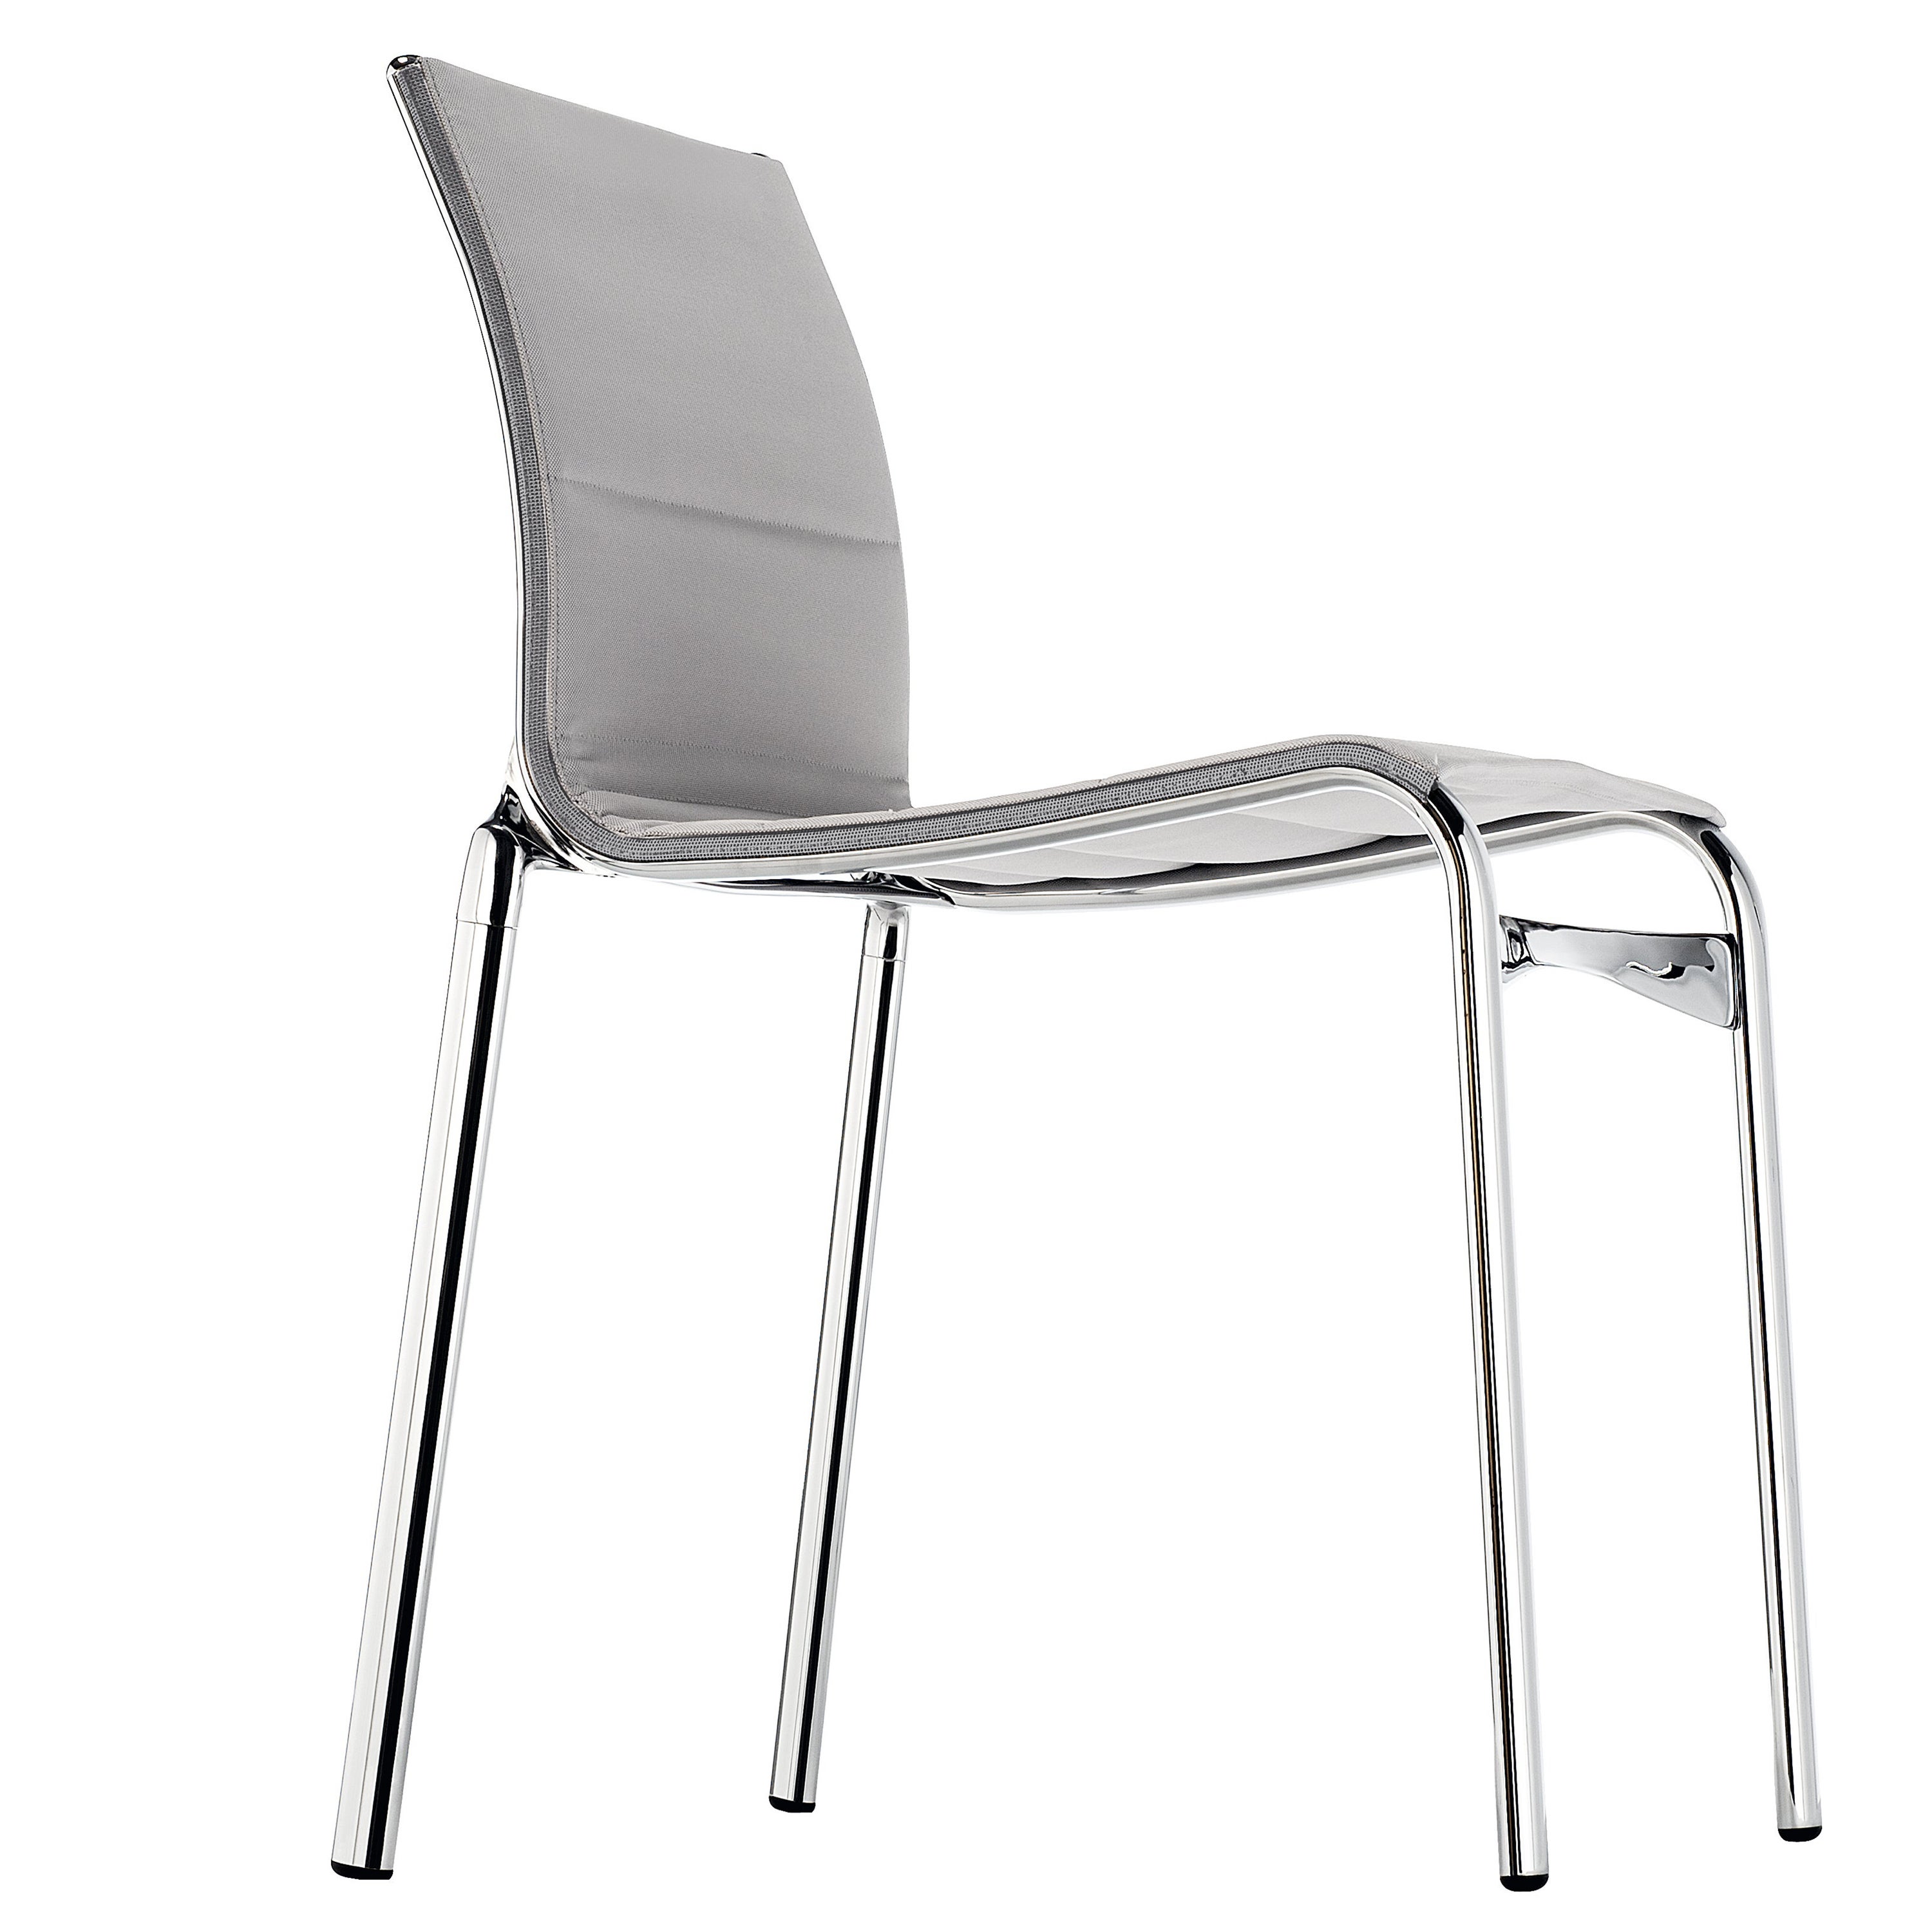 Alias Highframe 40 Chair in Grey Upholstered Seat with Chromed Aluminium Frame